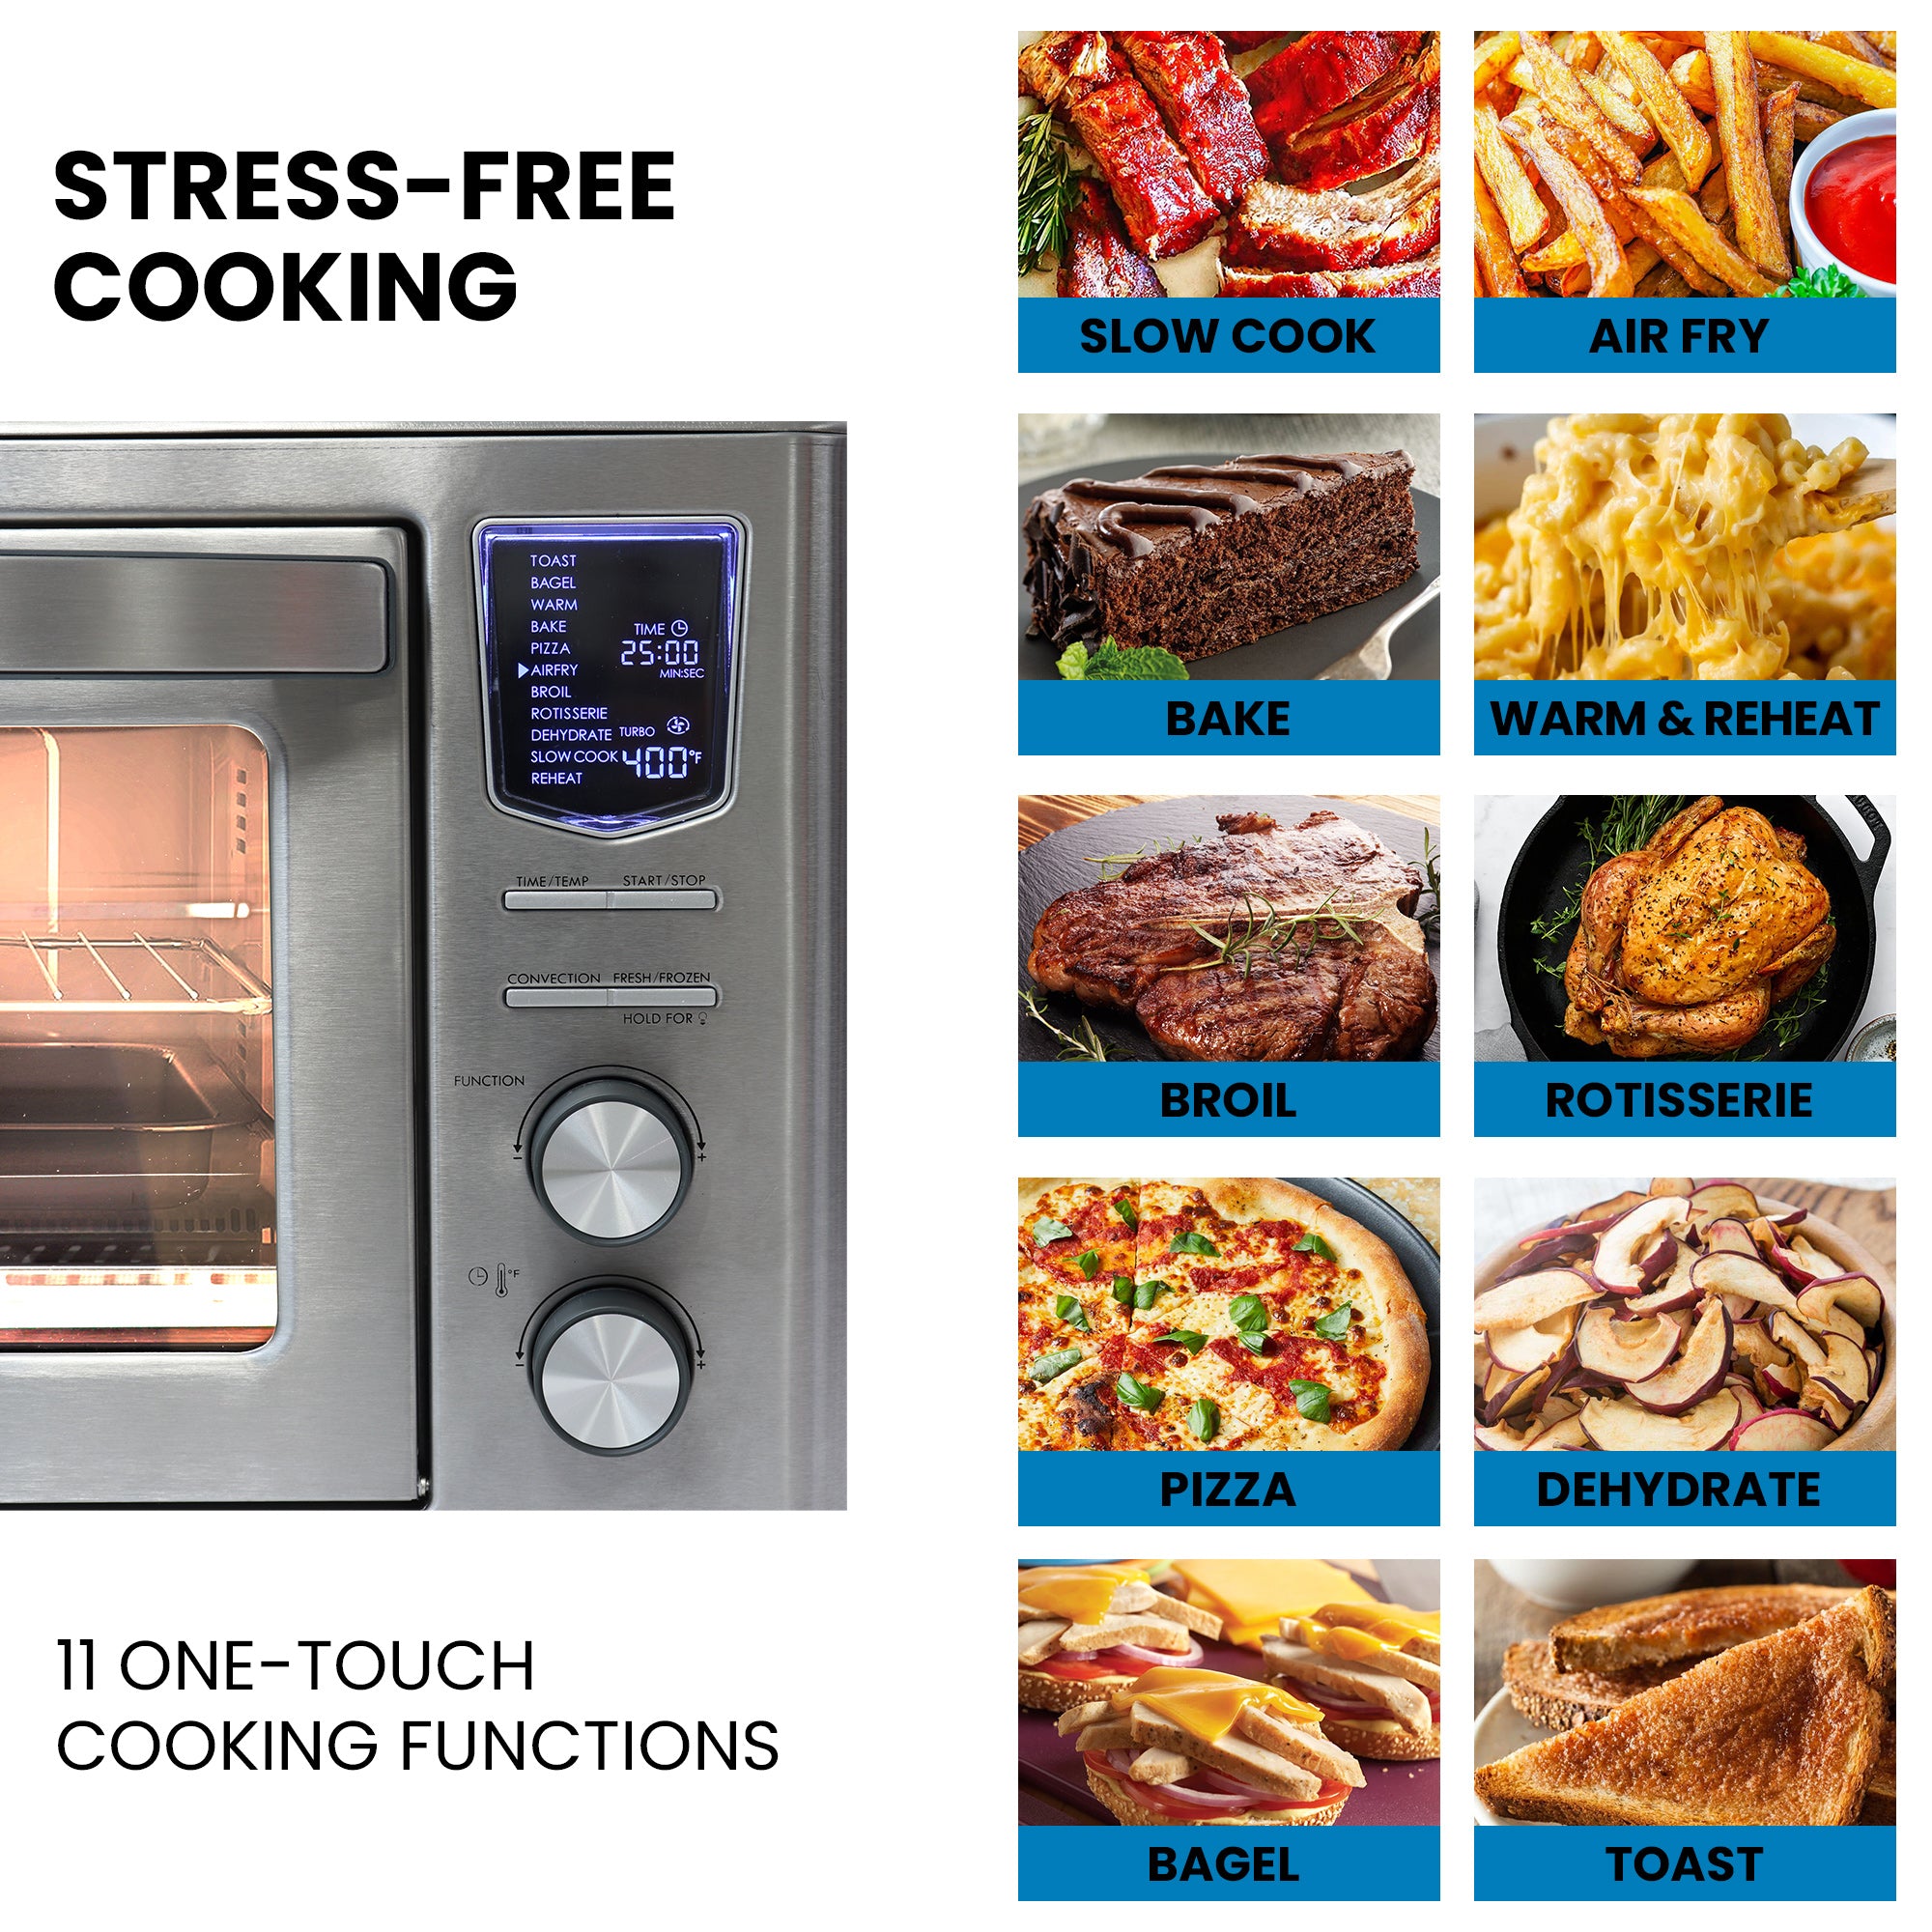 Closeup of the controls and interior light of the Kenmore digital convection toaster oven/air fryer with text above reading, "Stress-free cooking," and text below reading, "11 one-touch cooking functions." Ten images to the right, labeled, show examples of the cooking functions: Slow cook; air fry; bake; warm & reheat; broil; rotisserie; pizza; dehydrate; bagel; toast